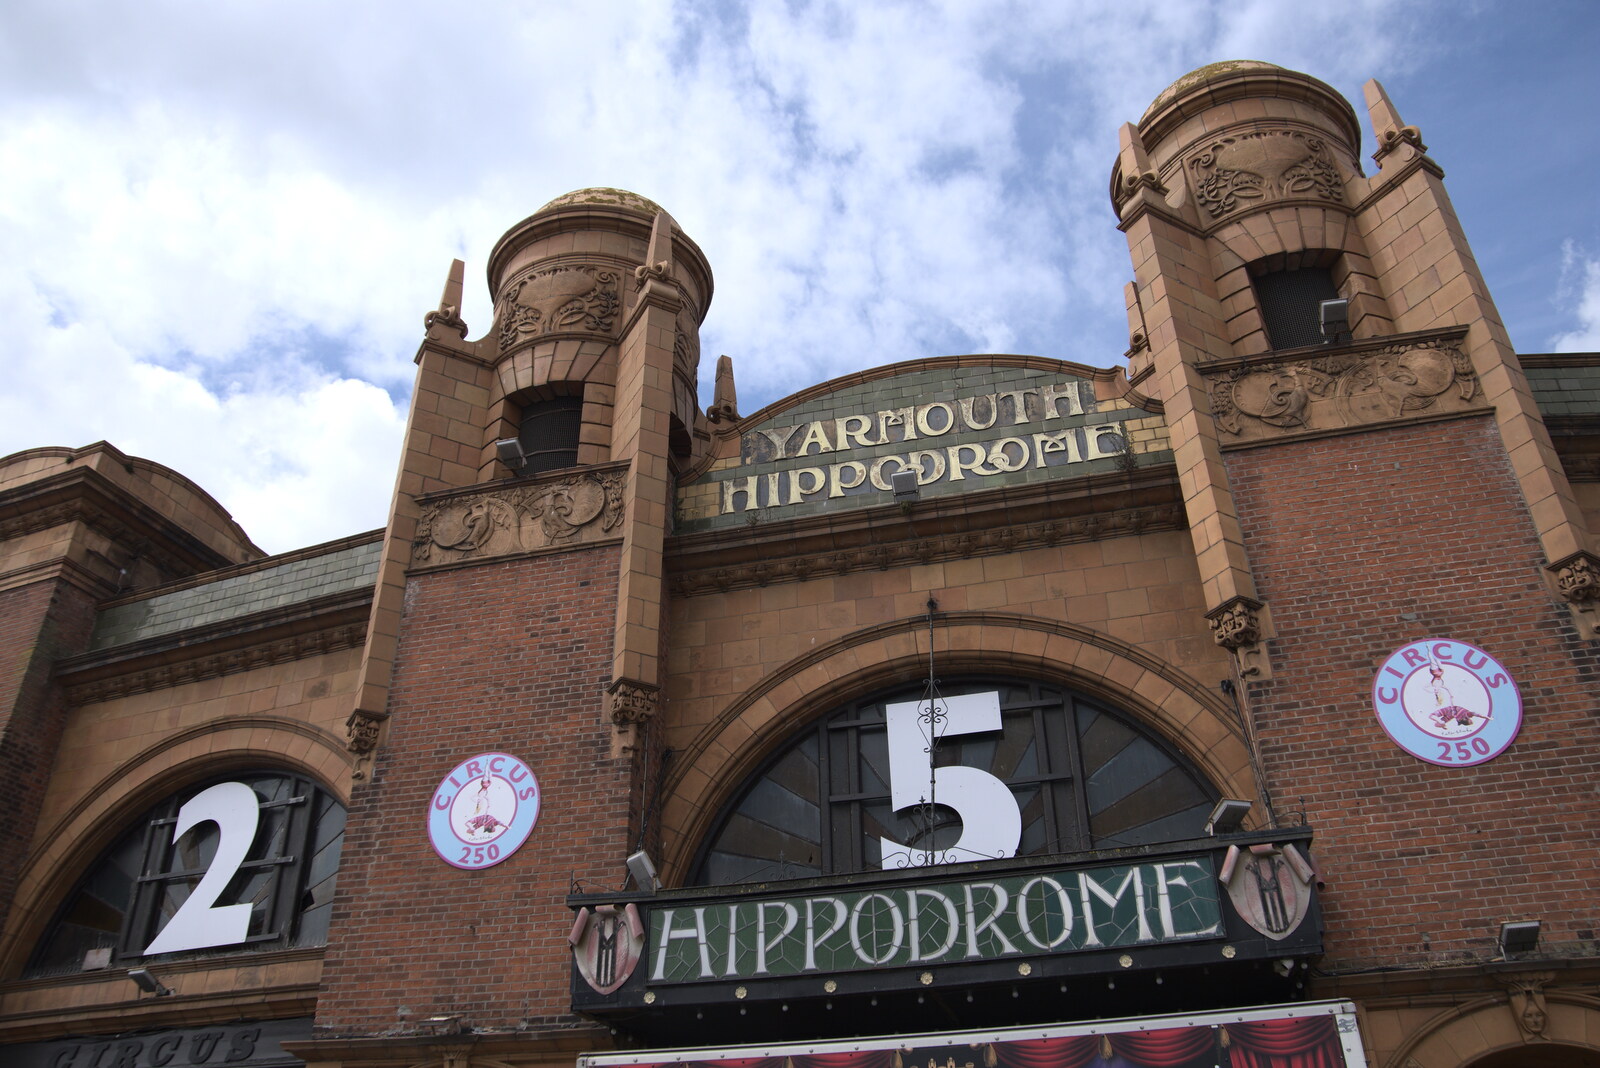 Yarmouth Hippodrome from Faded Seaside Glamour: A Weekend in Great Yarmouth, Norfolk - 29th May 2022